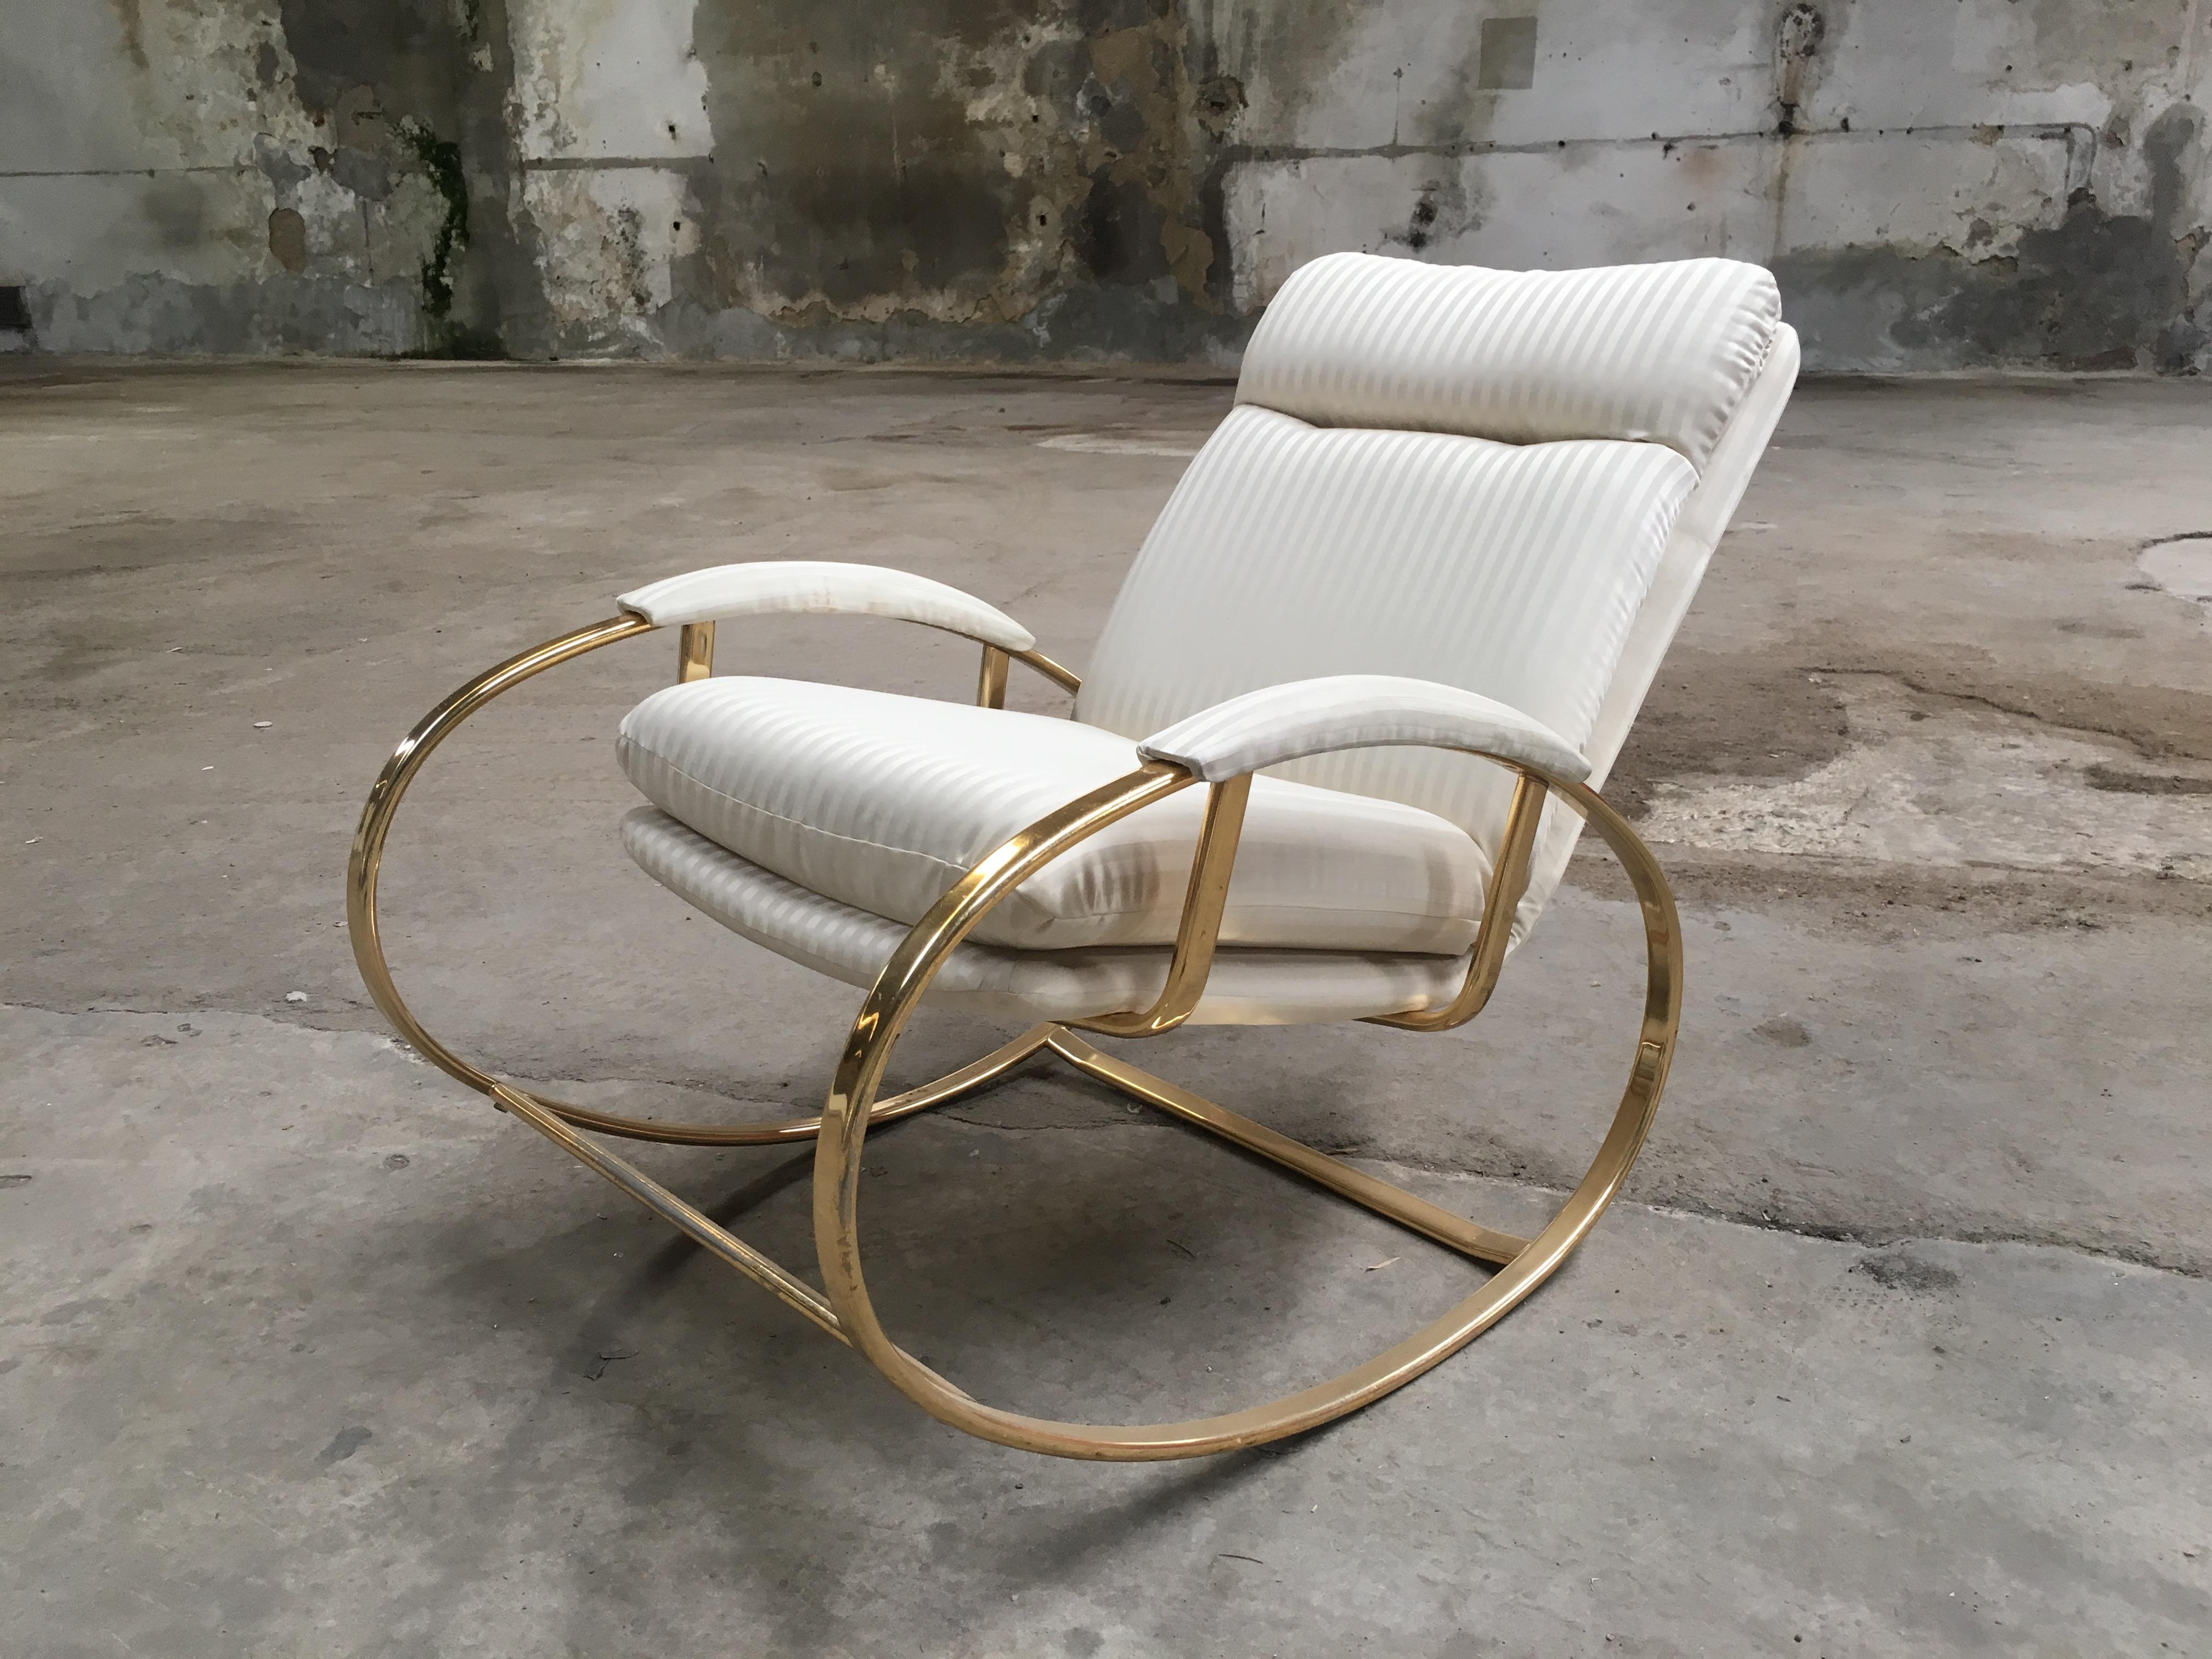 Mid-Century Modern Italian Guido Faleschini gilt metal lounge rocking chair with its original fabric upholstery, 1970s
This rocking chair is in really good vintage conditions. Wear consistent with age and use.
Quotation for a new upholstery on